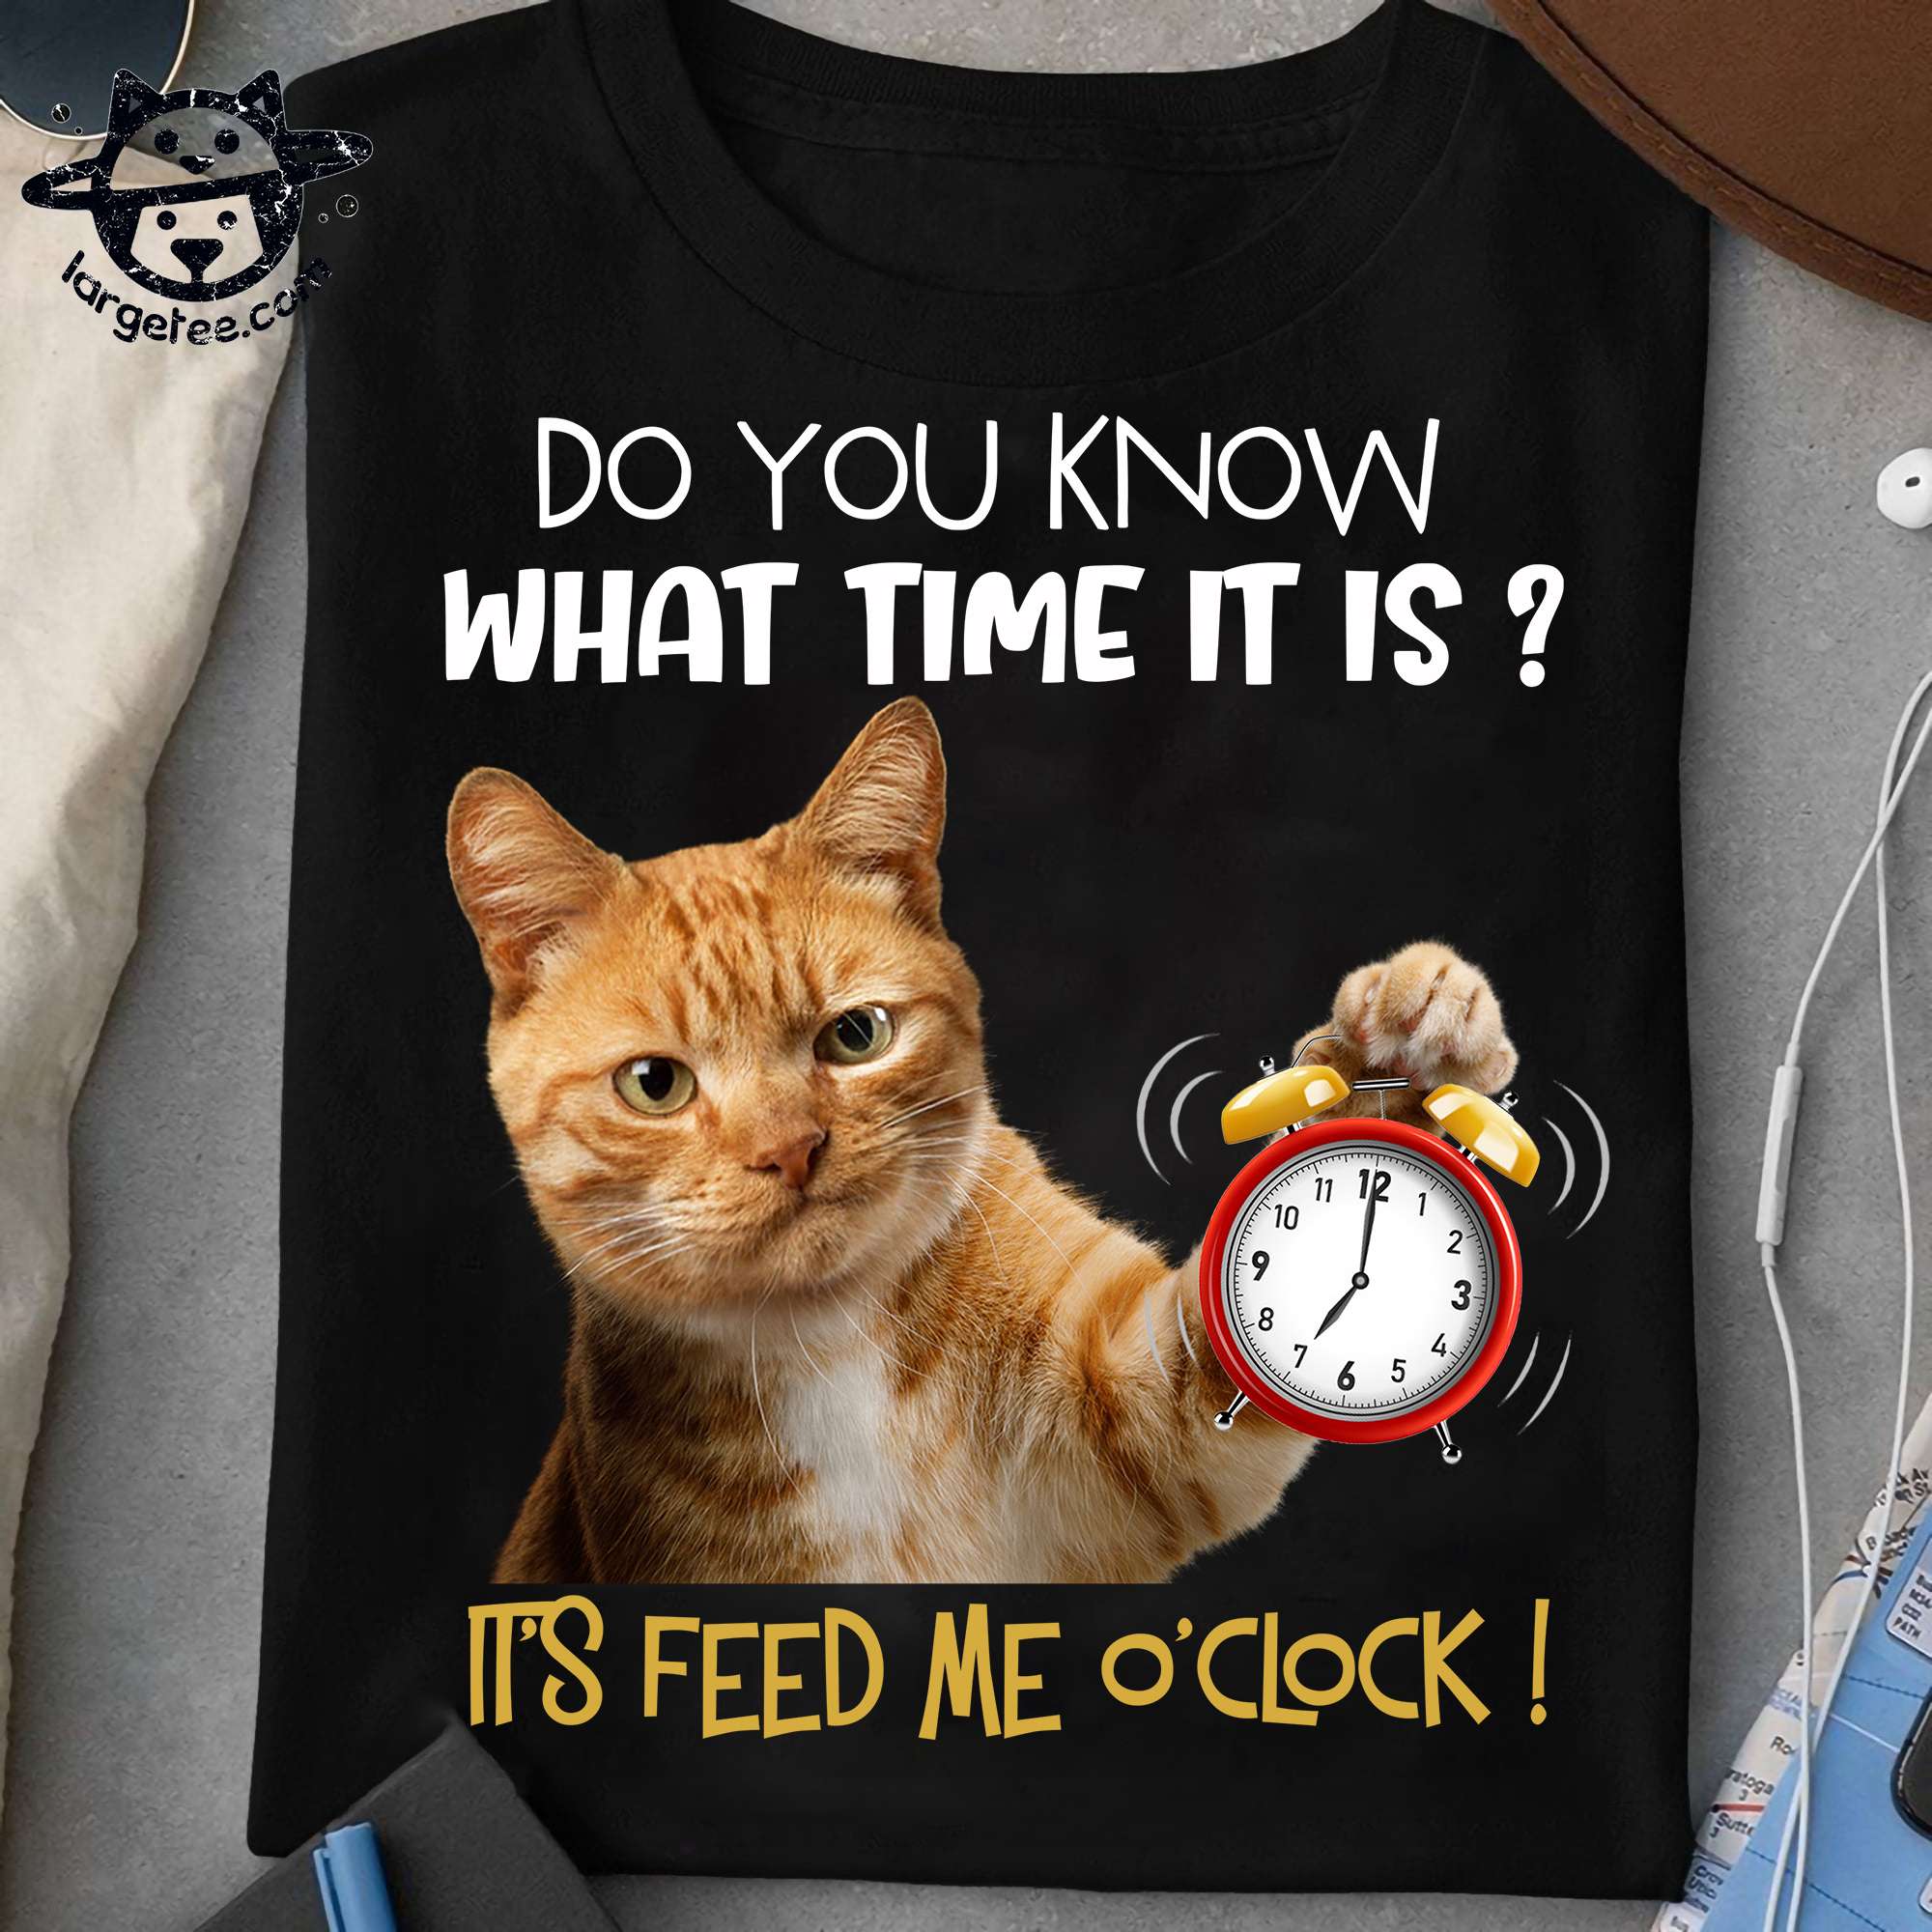 Cat With Clock - Do you know what time it is? it's feed me o'clock